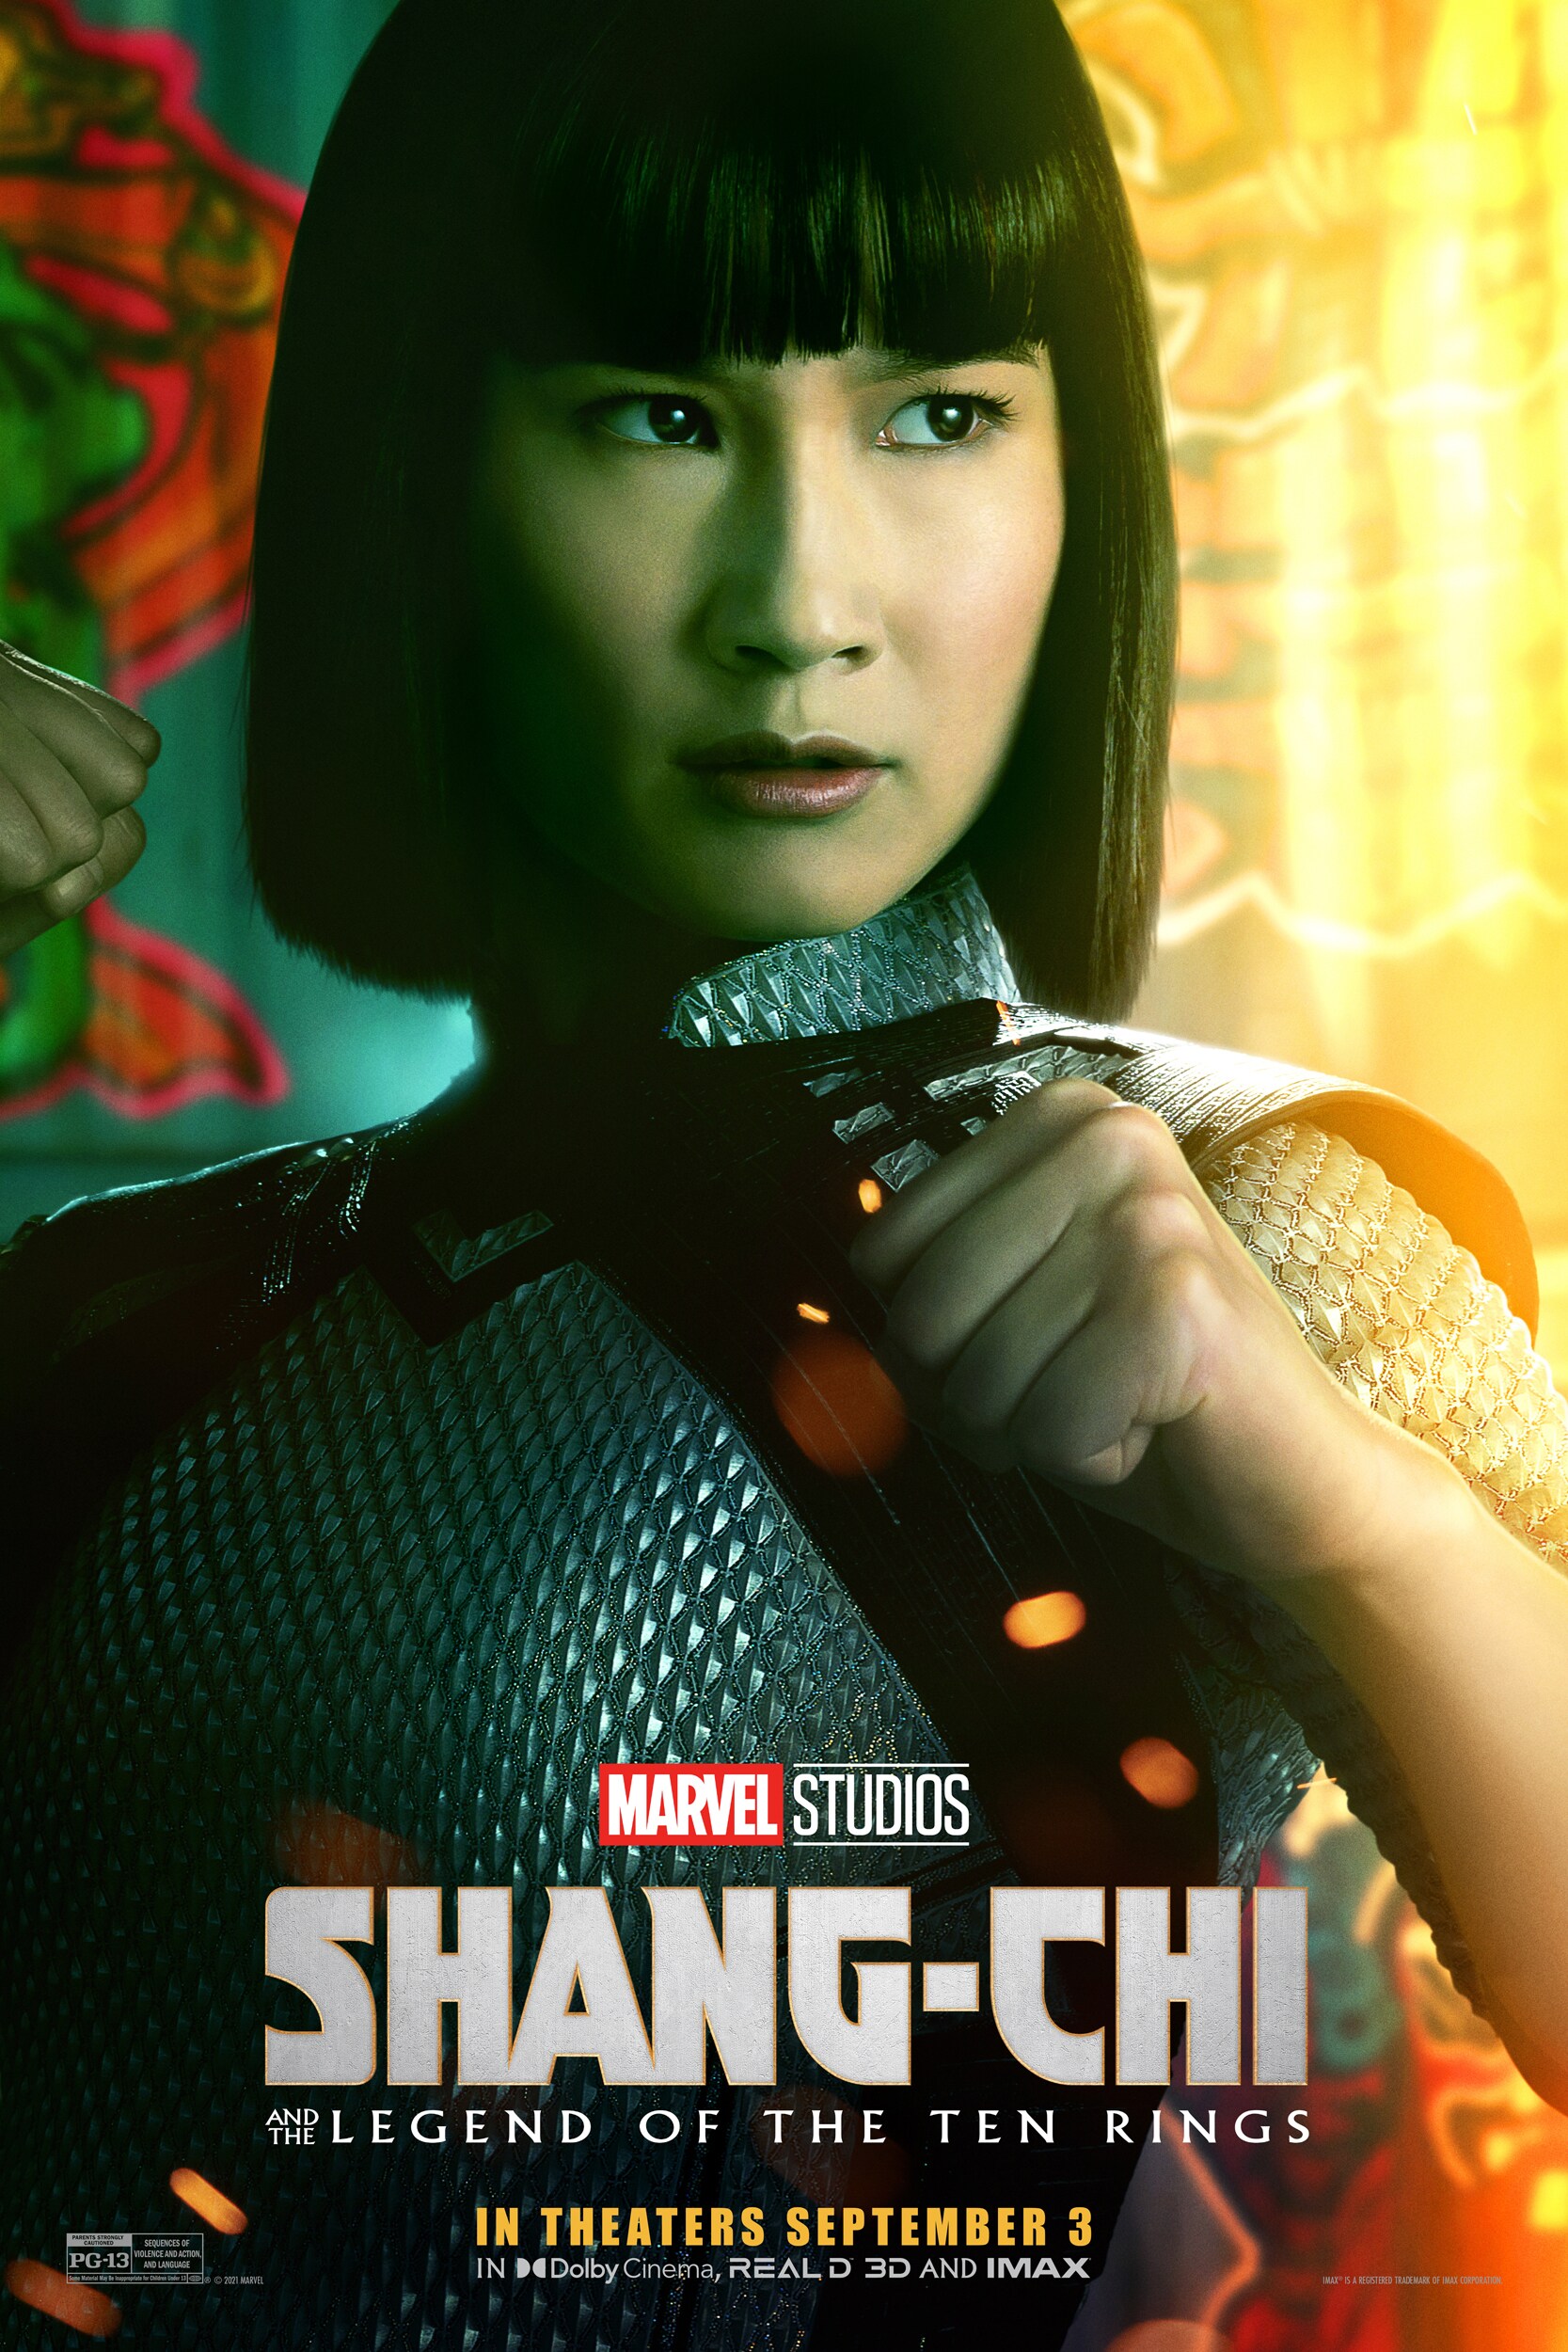 Meng'er Zhang plays Xialing in Marvel Studios' Shang-Chi and The Legend of The Ten Rings